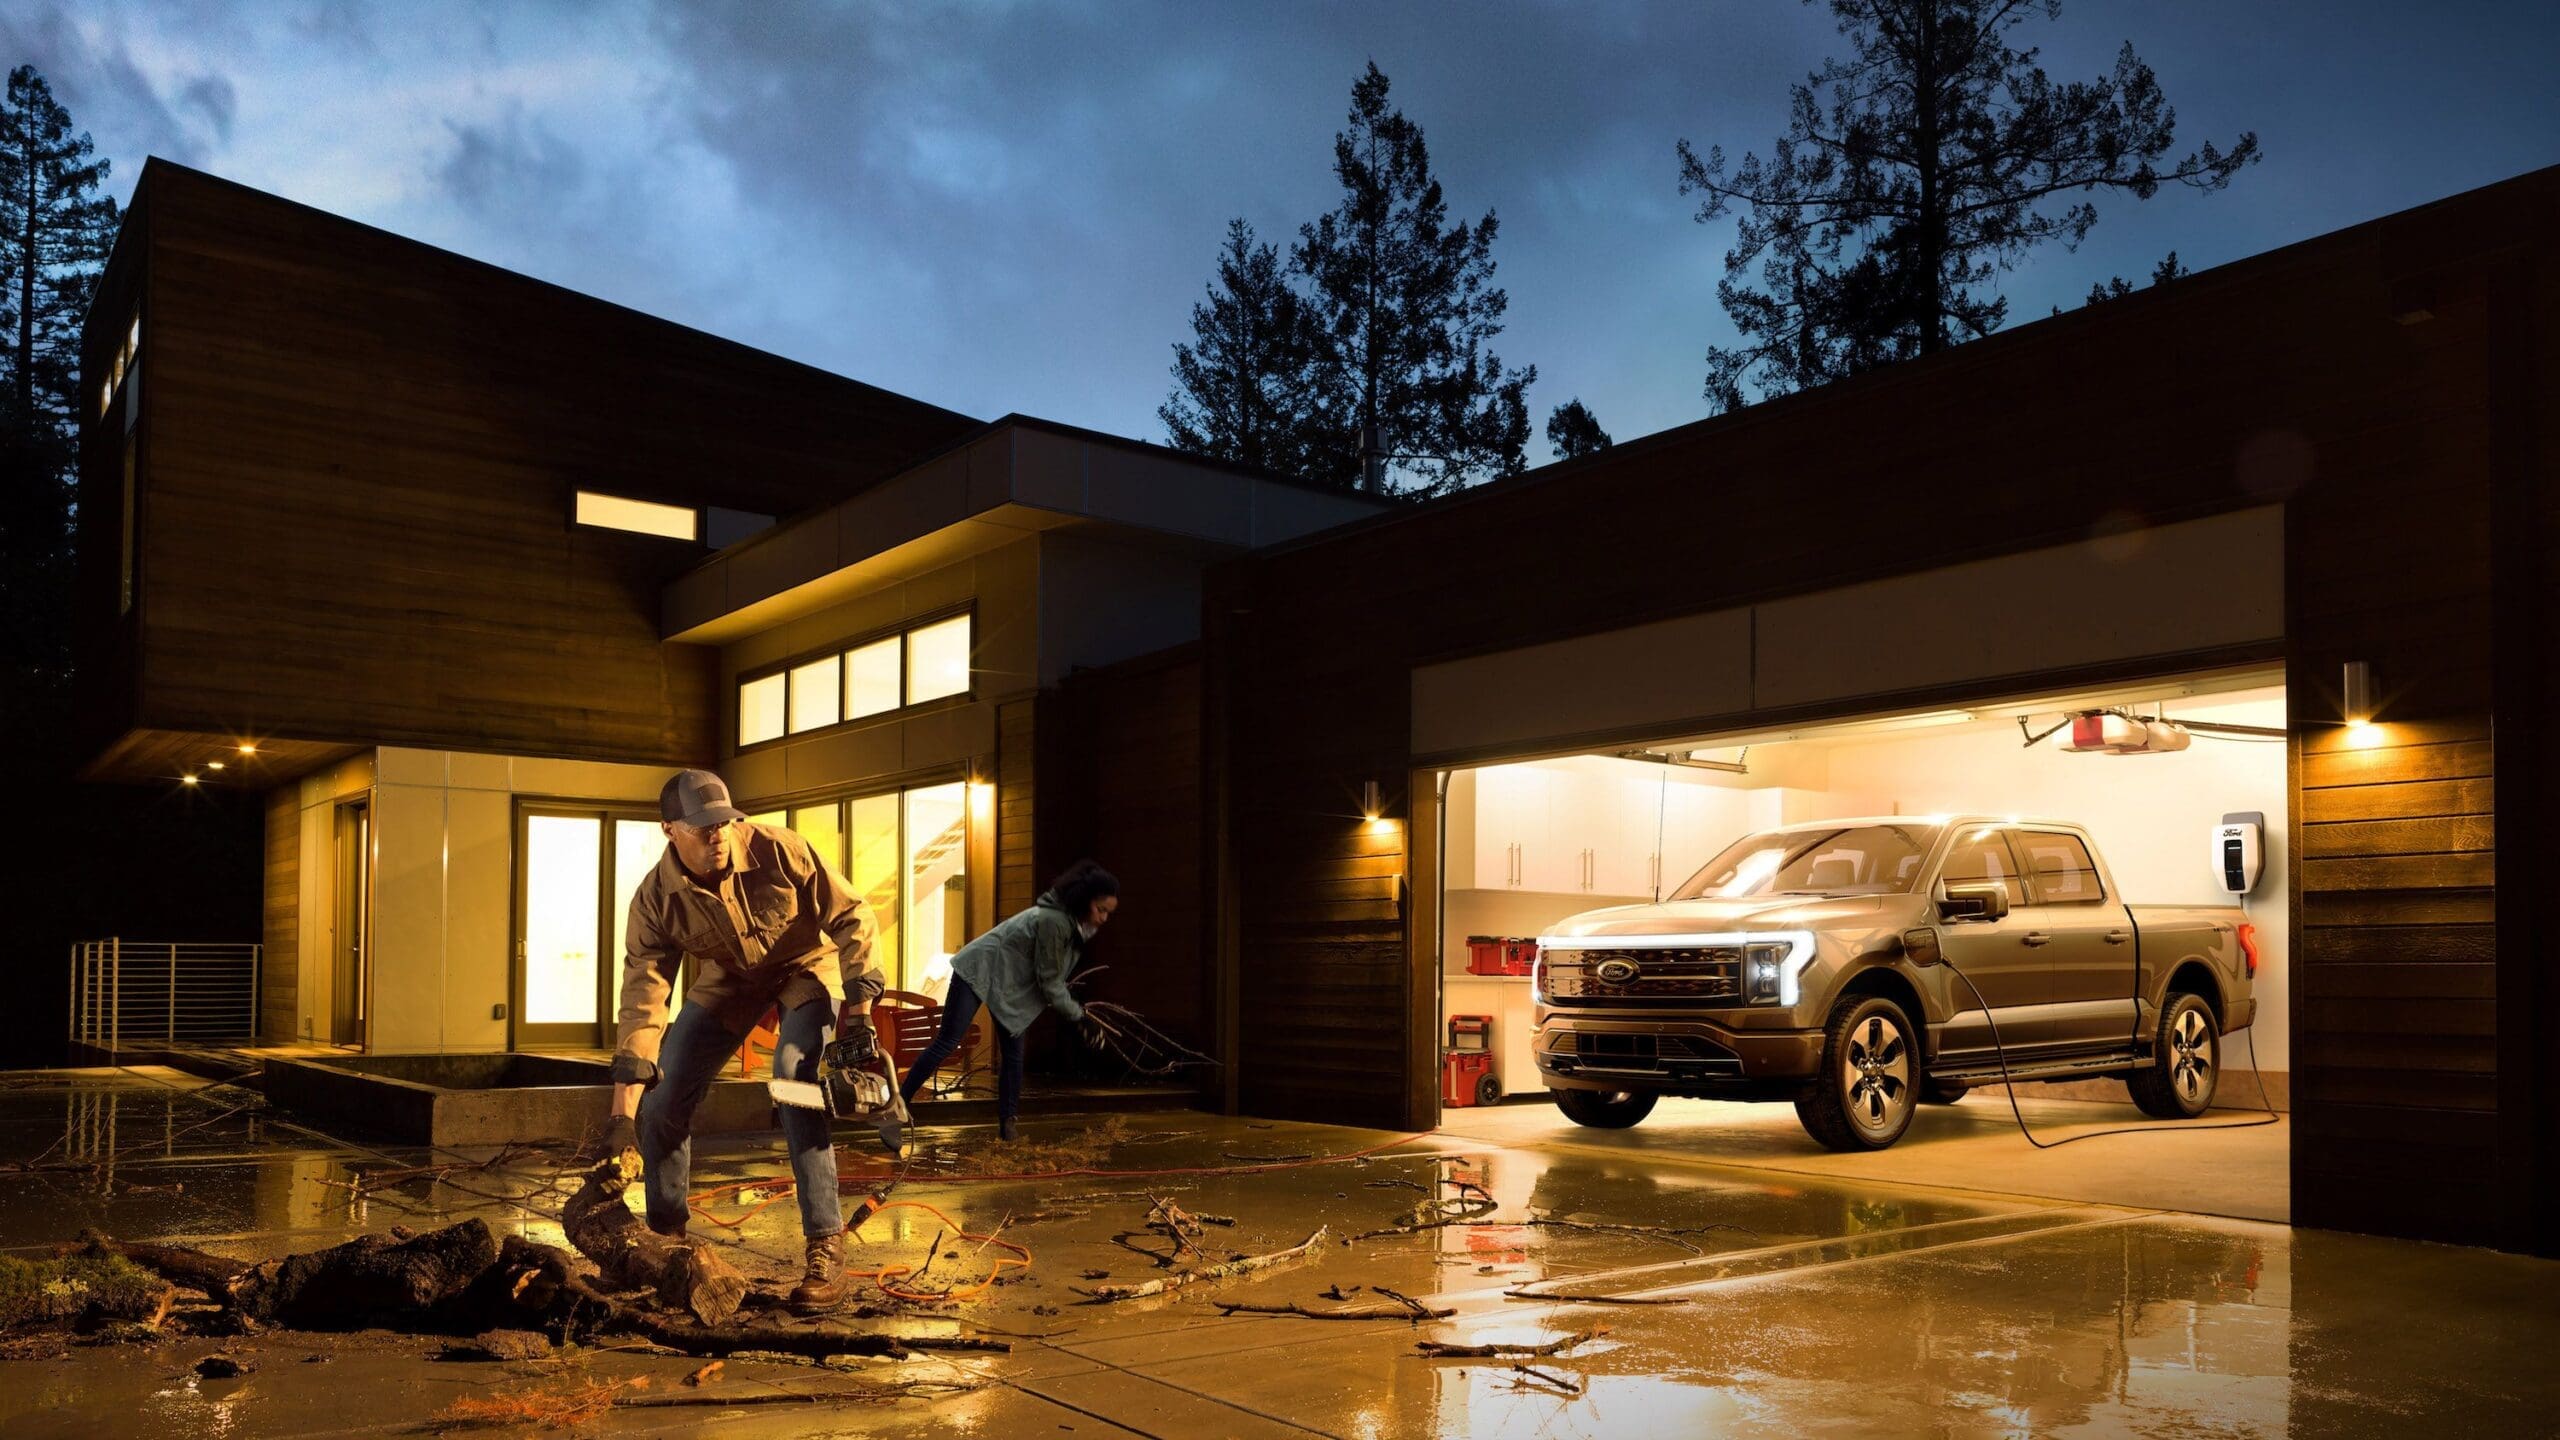 Can The New Ford Power A House?